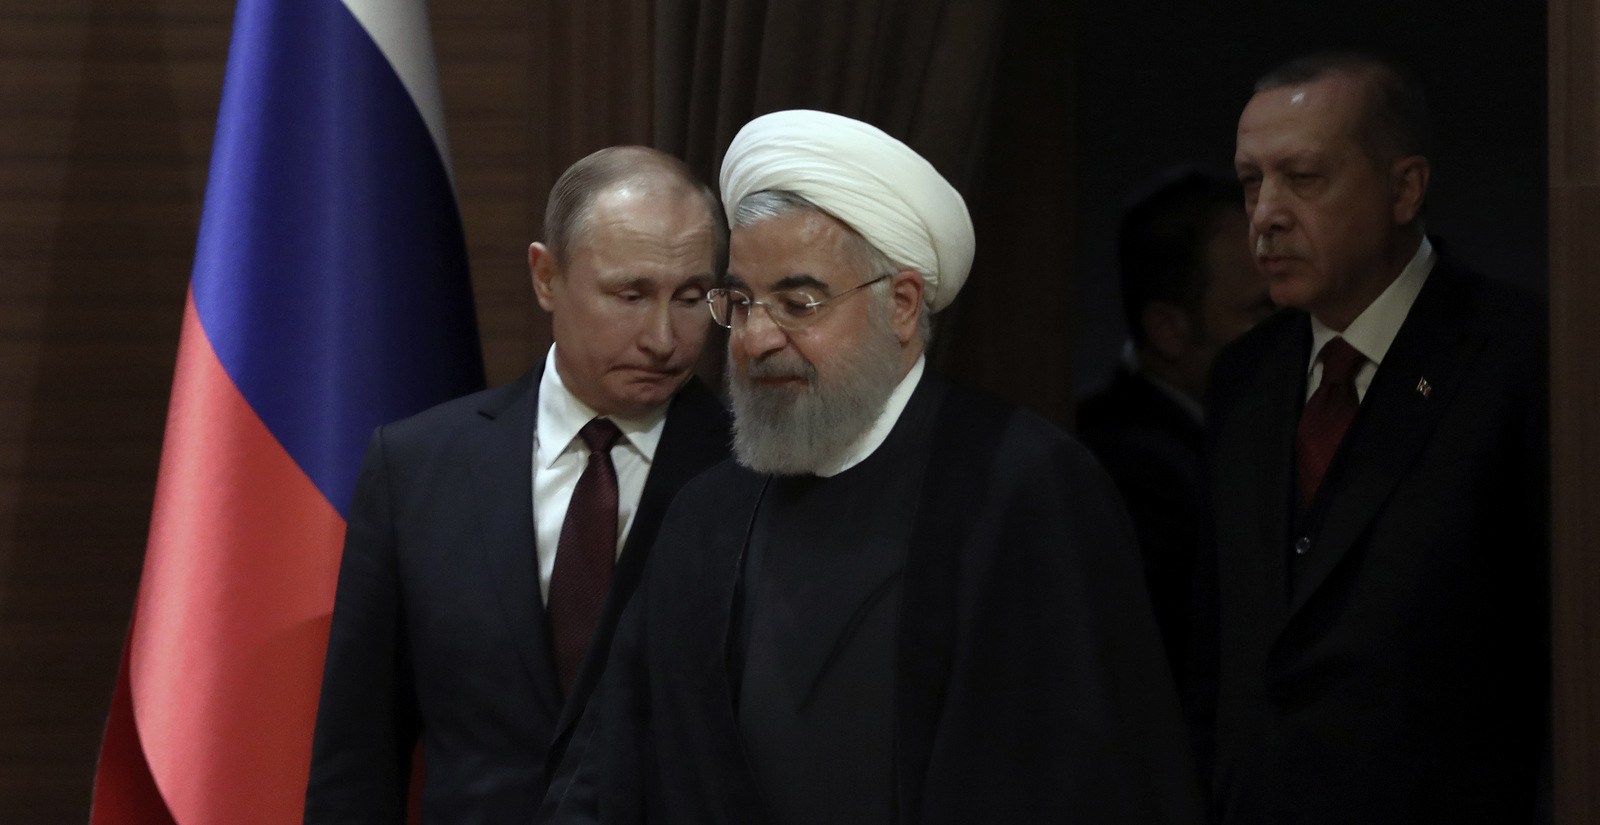 Iran's President Hassan Rouhani, front, Russia's President Vladimir Putin, left, and Turkey's President Recep Tayyip Erdogan arrive for a joint press conference in Ankara, Turkey, Wednesday, April 4, 2018. The leaders of Russia, Turkey and Iran say they stand against "separatist" agendas that would undermine Syria's sovereignty and territorial integrity. (AP Photo/Burhan Ozbilici)